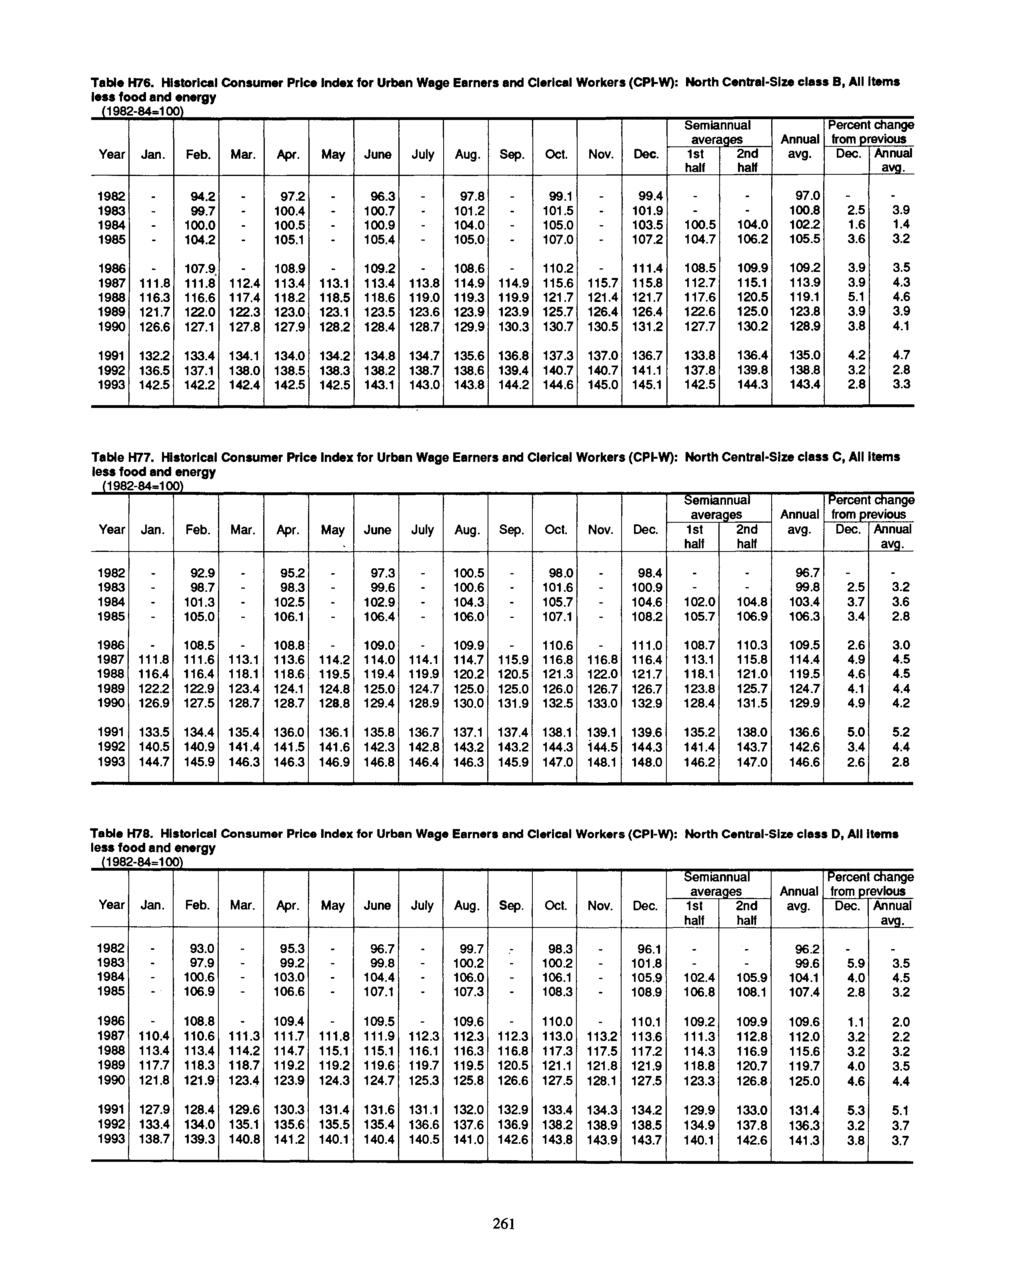 Table H76. Historical Consumer Price for Urban Wage Earners and Clerical Workers (CPI-W): North Central-Size class B, All items less food and energy (1982-84=100) Year Feb. Mar. Apr.